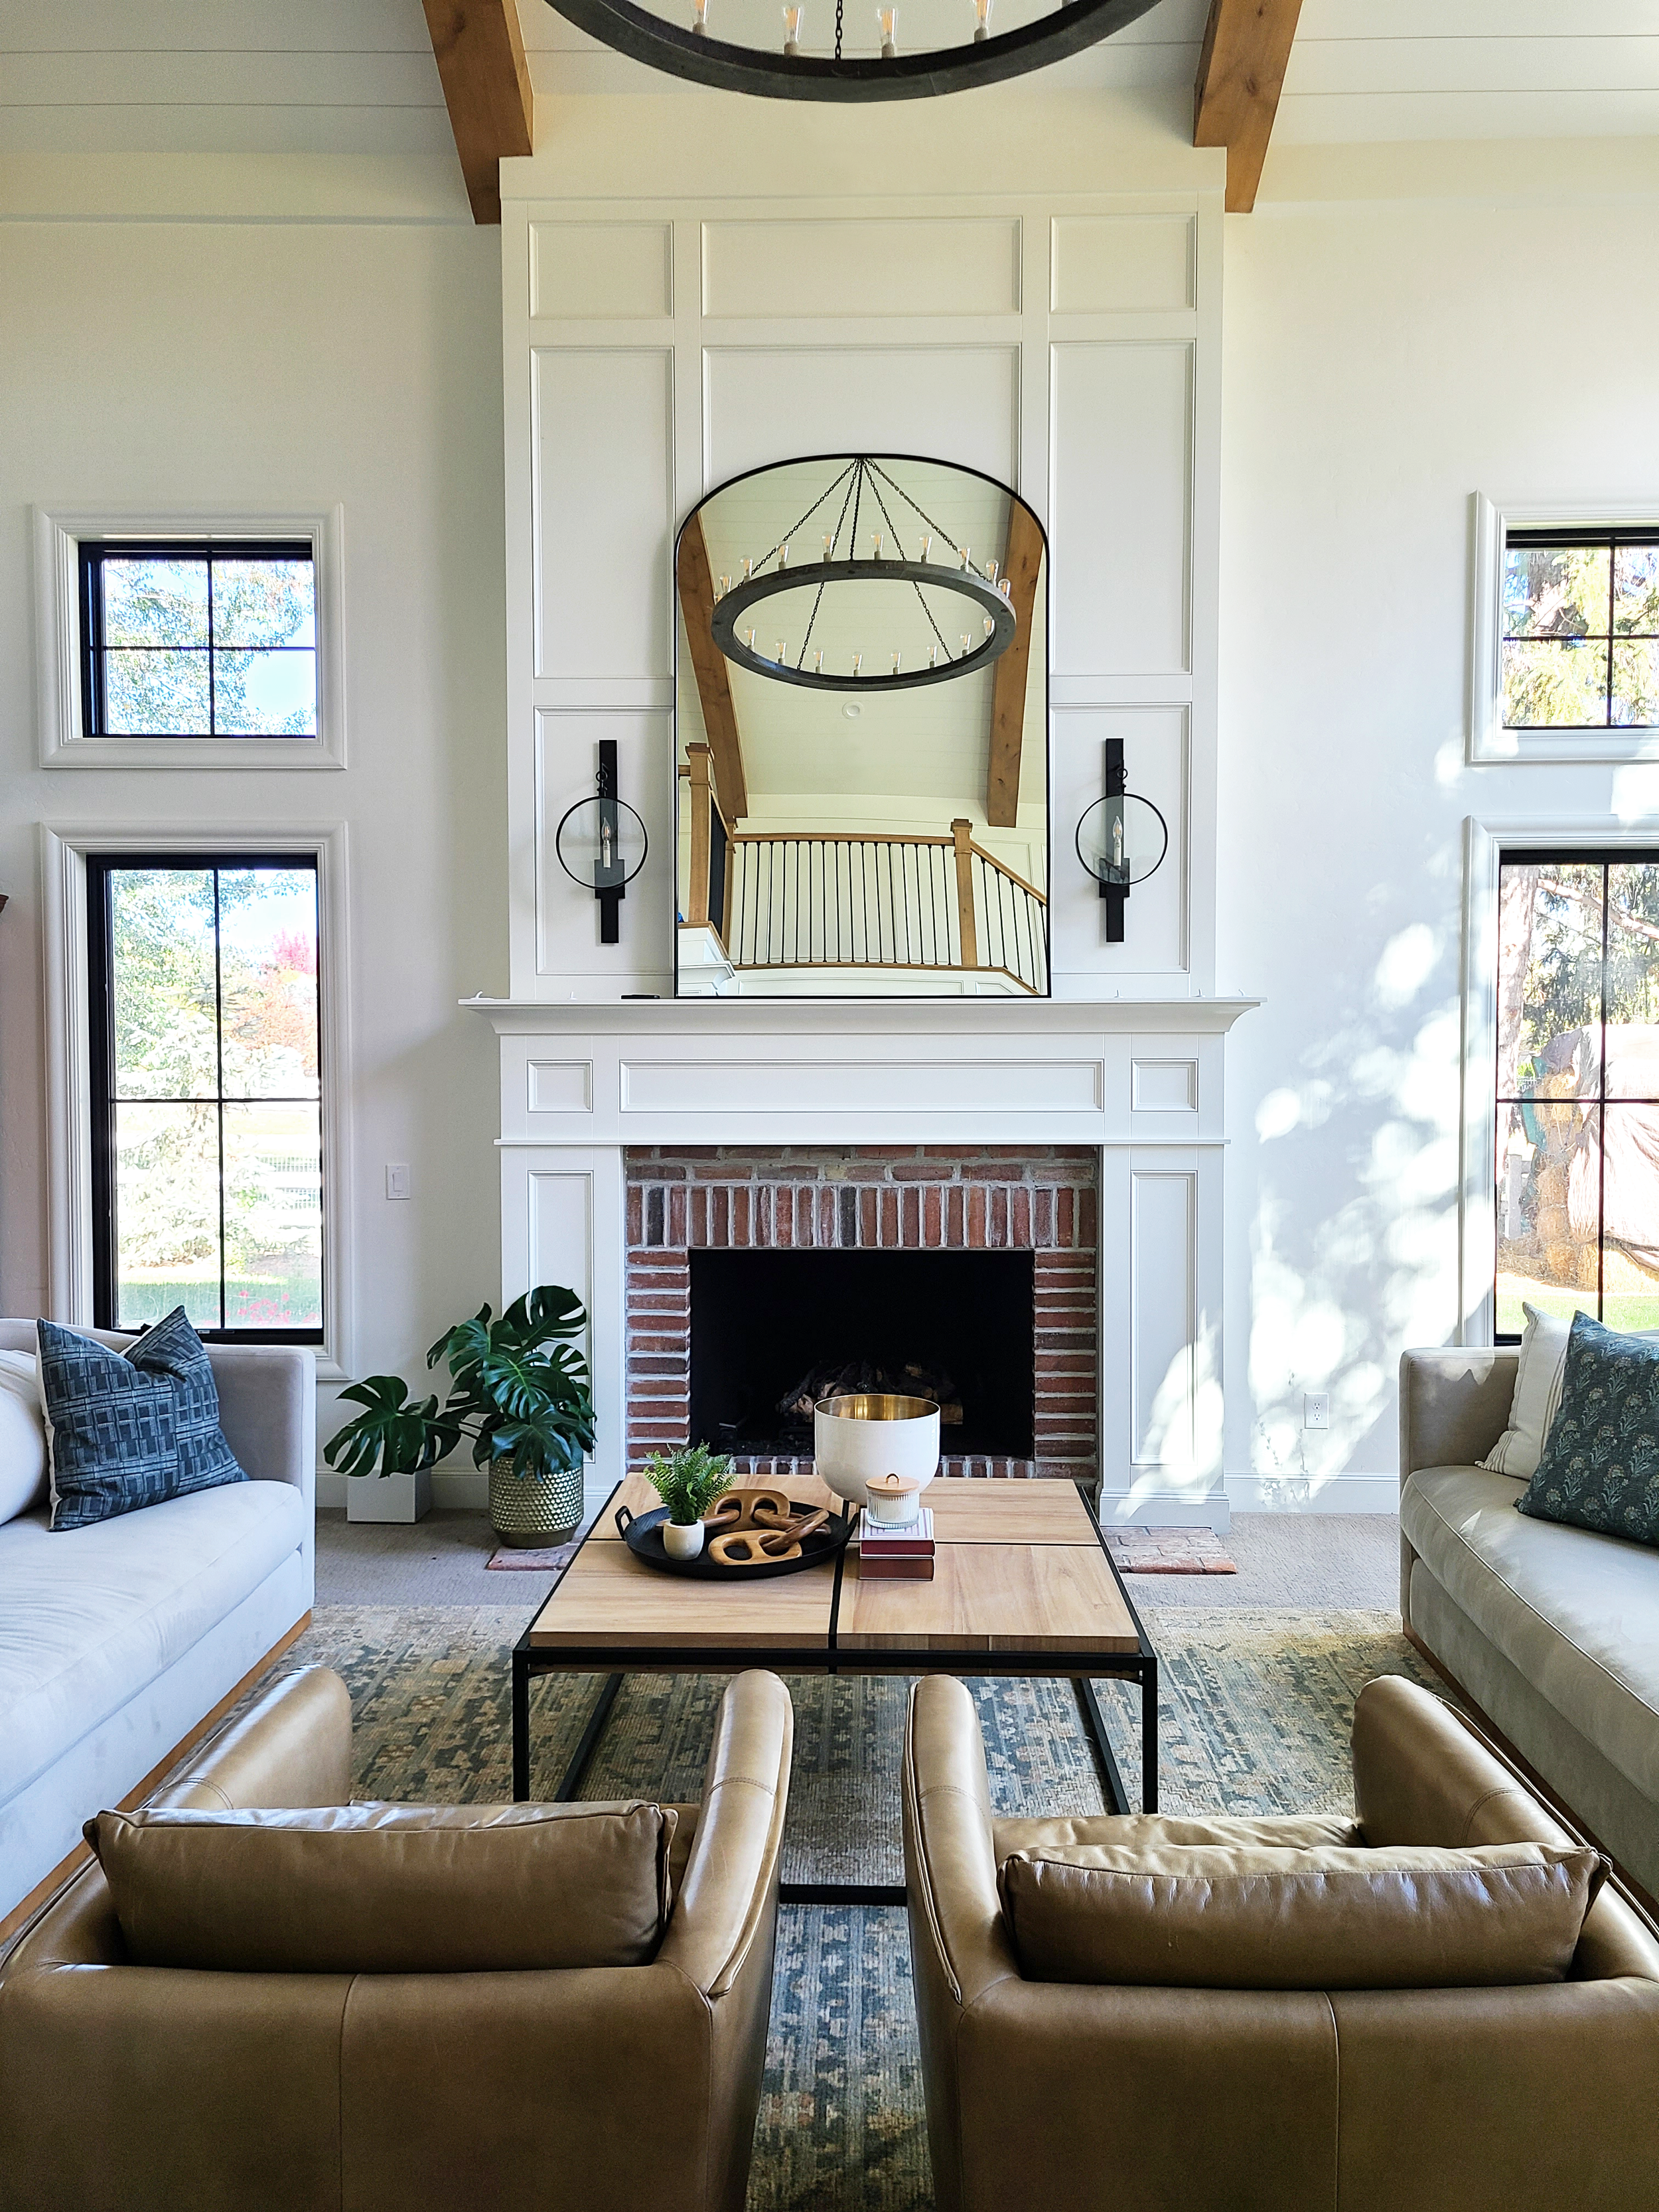   How to choose interior flooring for my new house build ideas by Liz Powell Design. brick fireplace traditional living room #LizPowellDesign #InteriorDesignUtah #InteriorDesigner #buildingahome #flooring #dreamhome #interiors #traditionalinteriors #